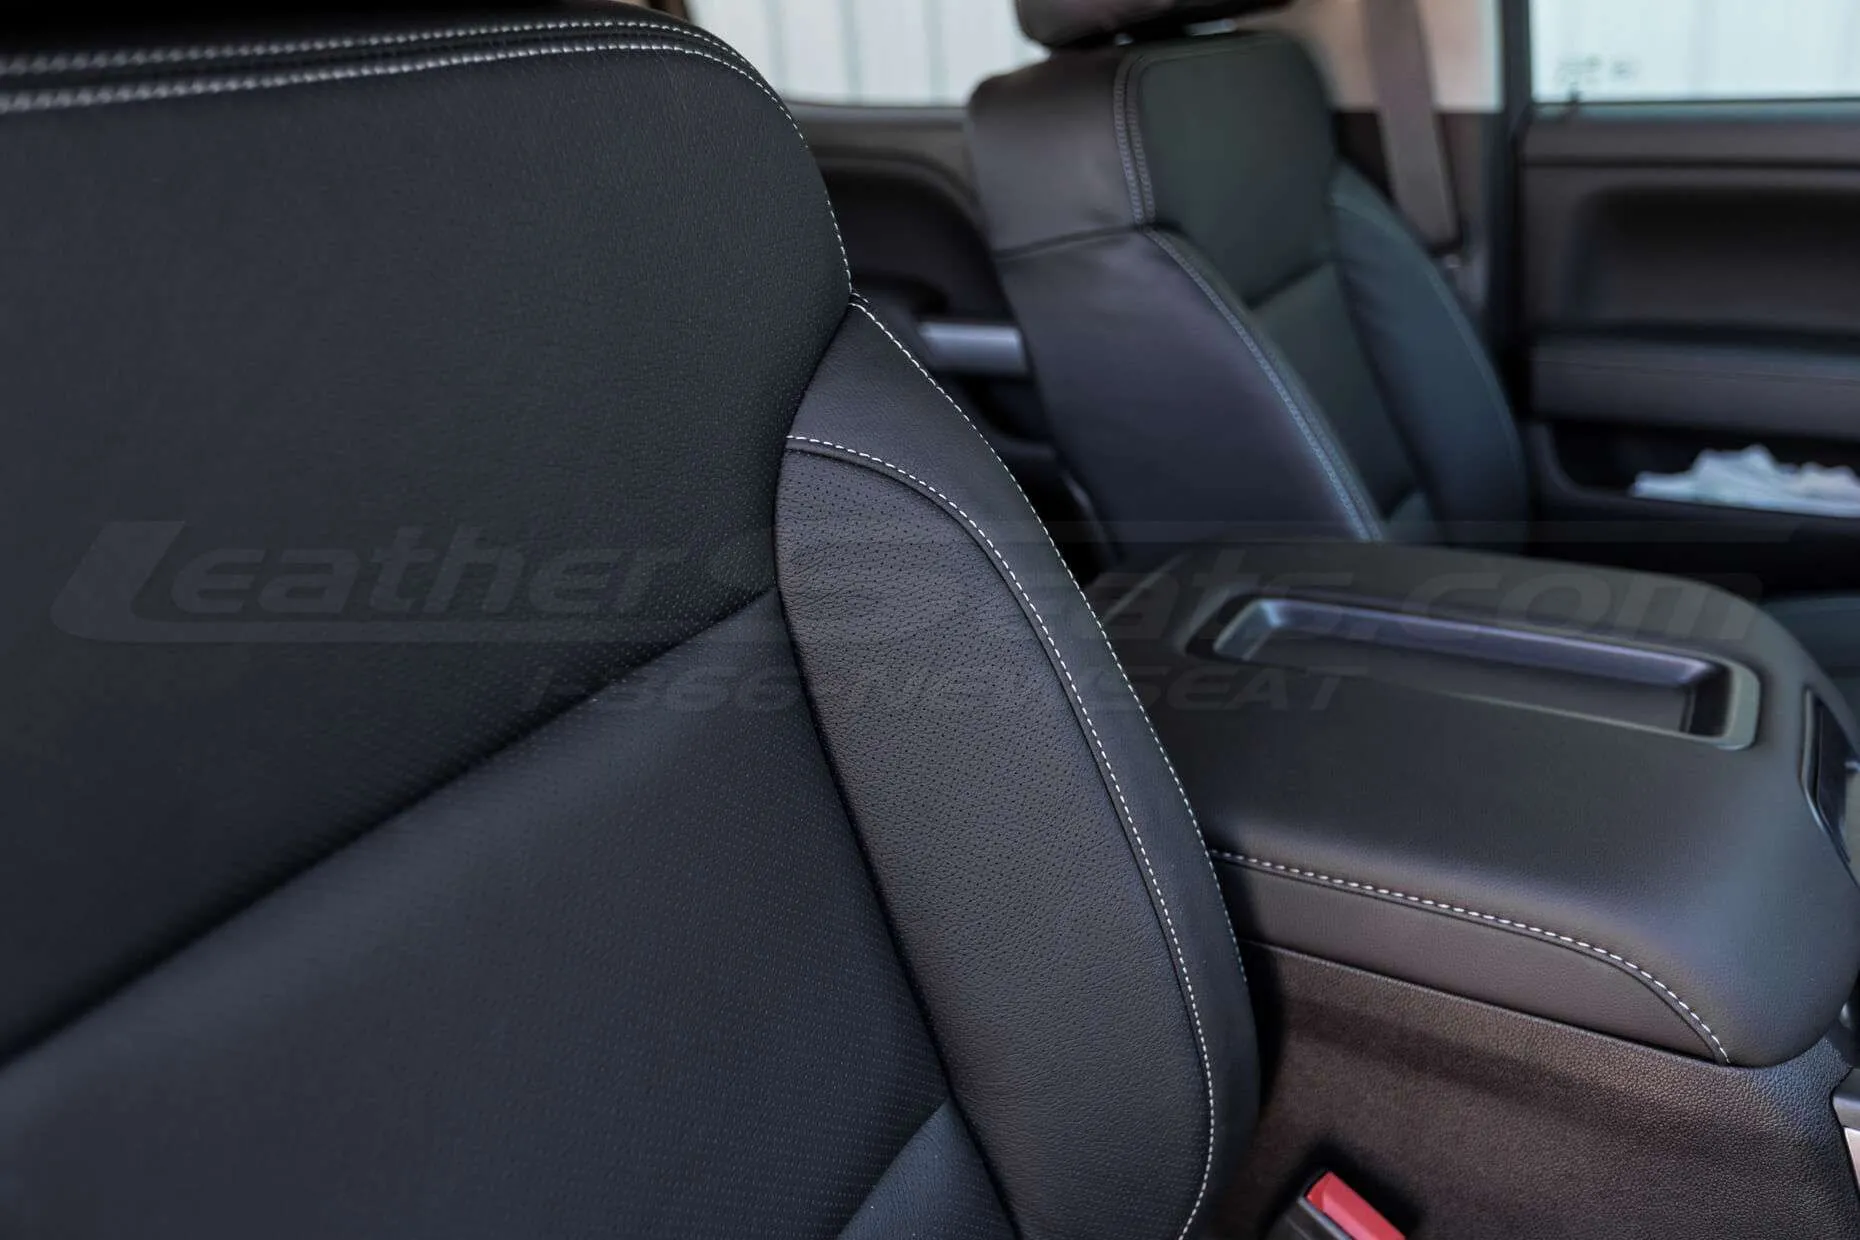 2014-2018 Chevrolet Silverado LeatherSeat Kit - Black - Installed - Bolster Double-Stitching close-up